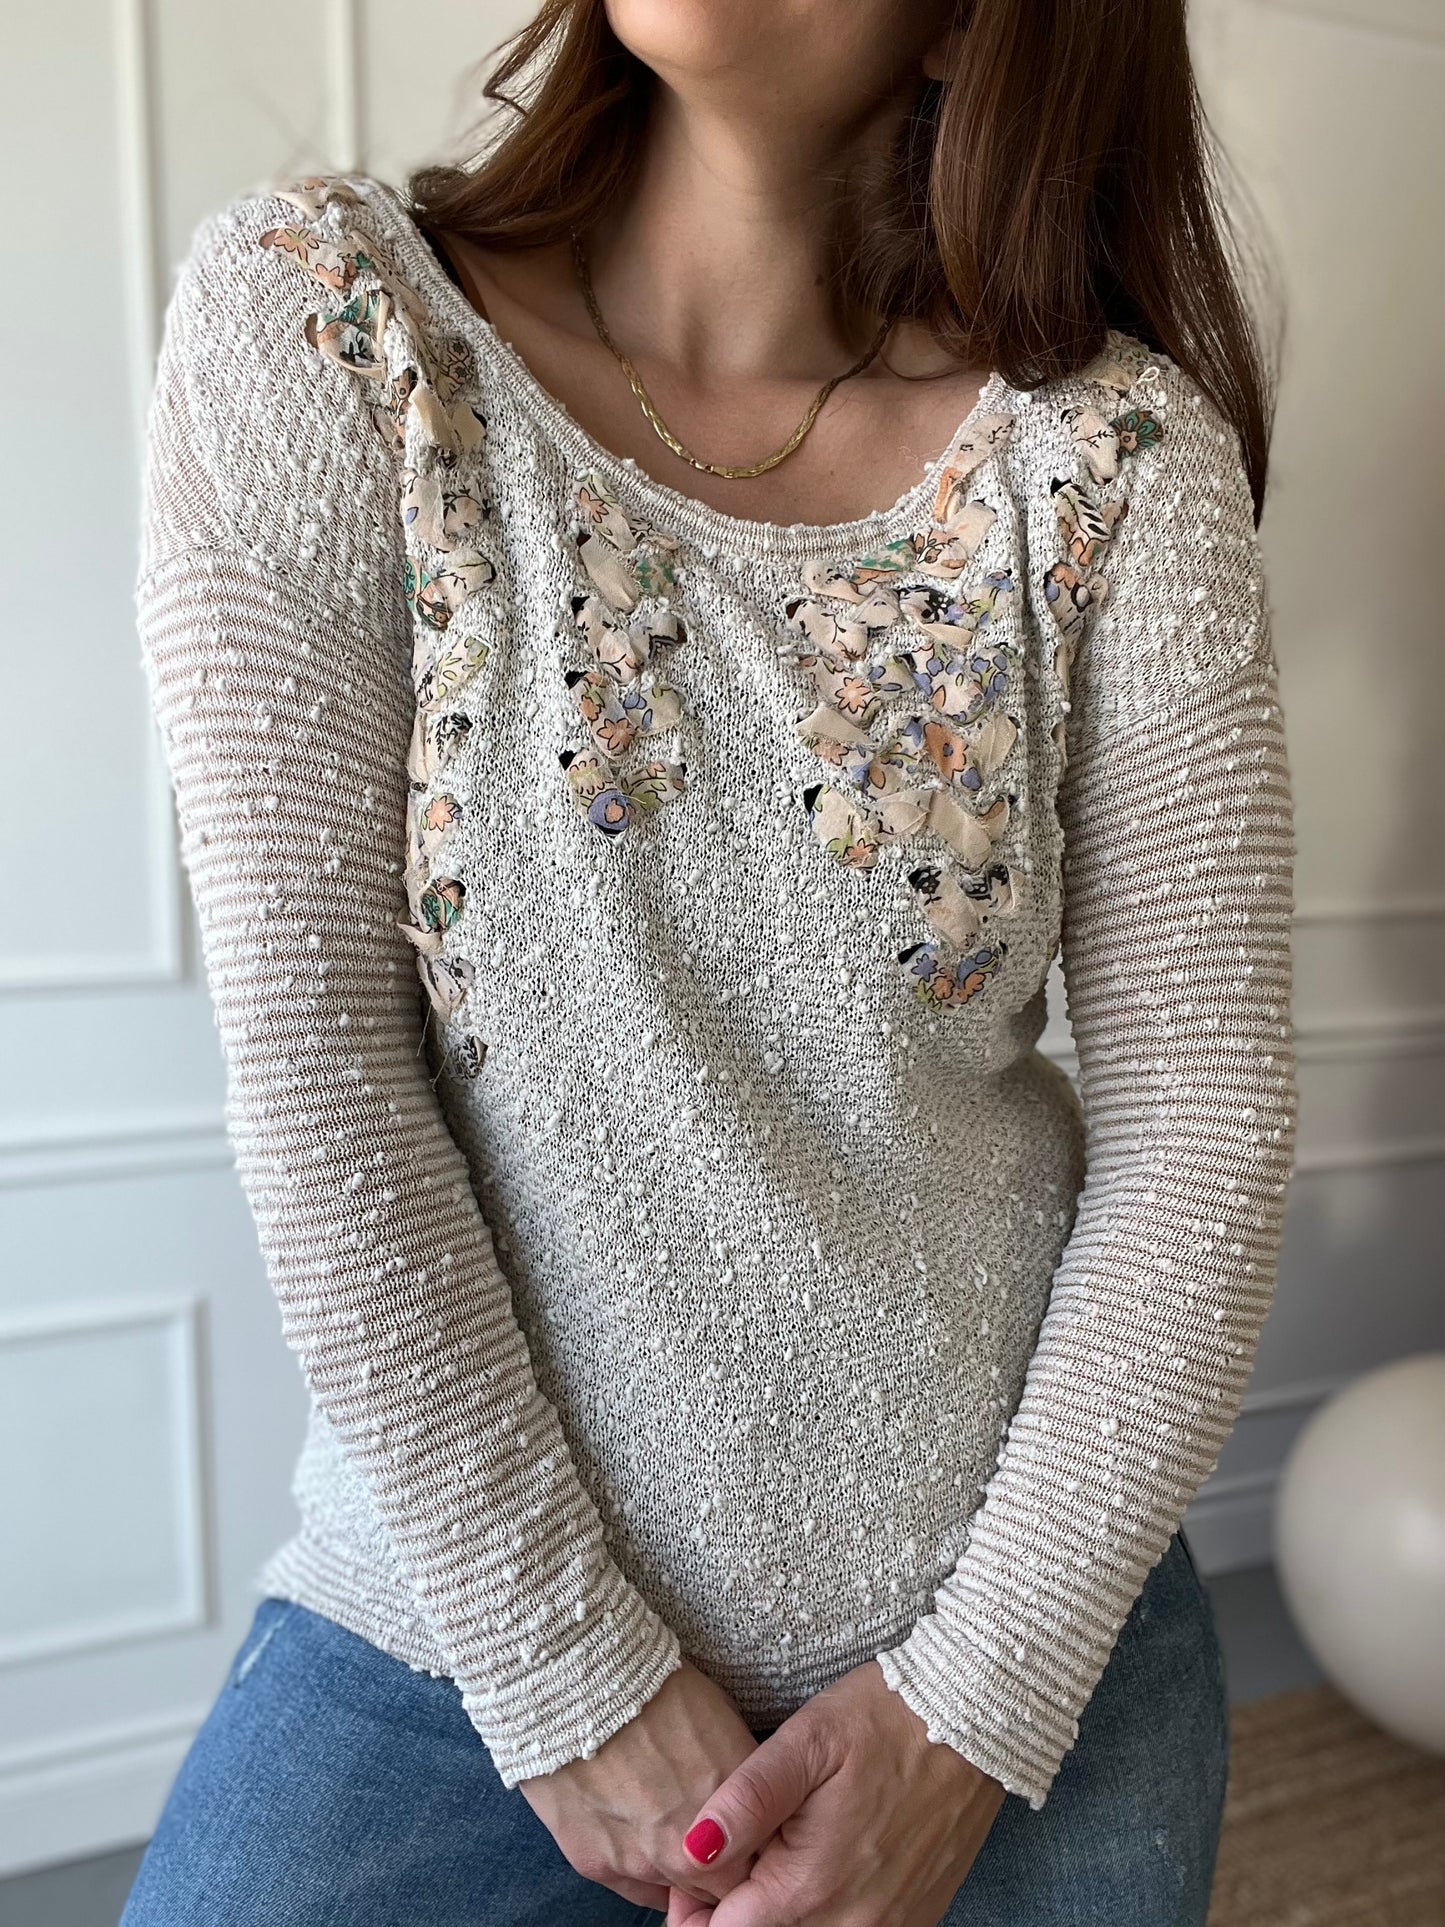 Lace Up Floral Cream Sweater - Size M